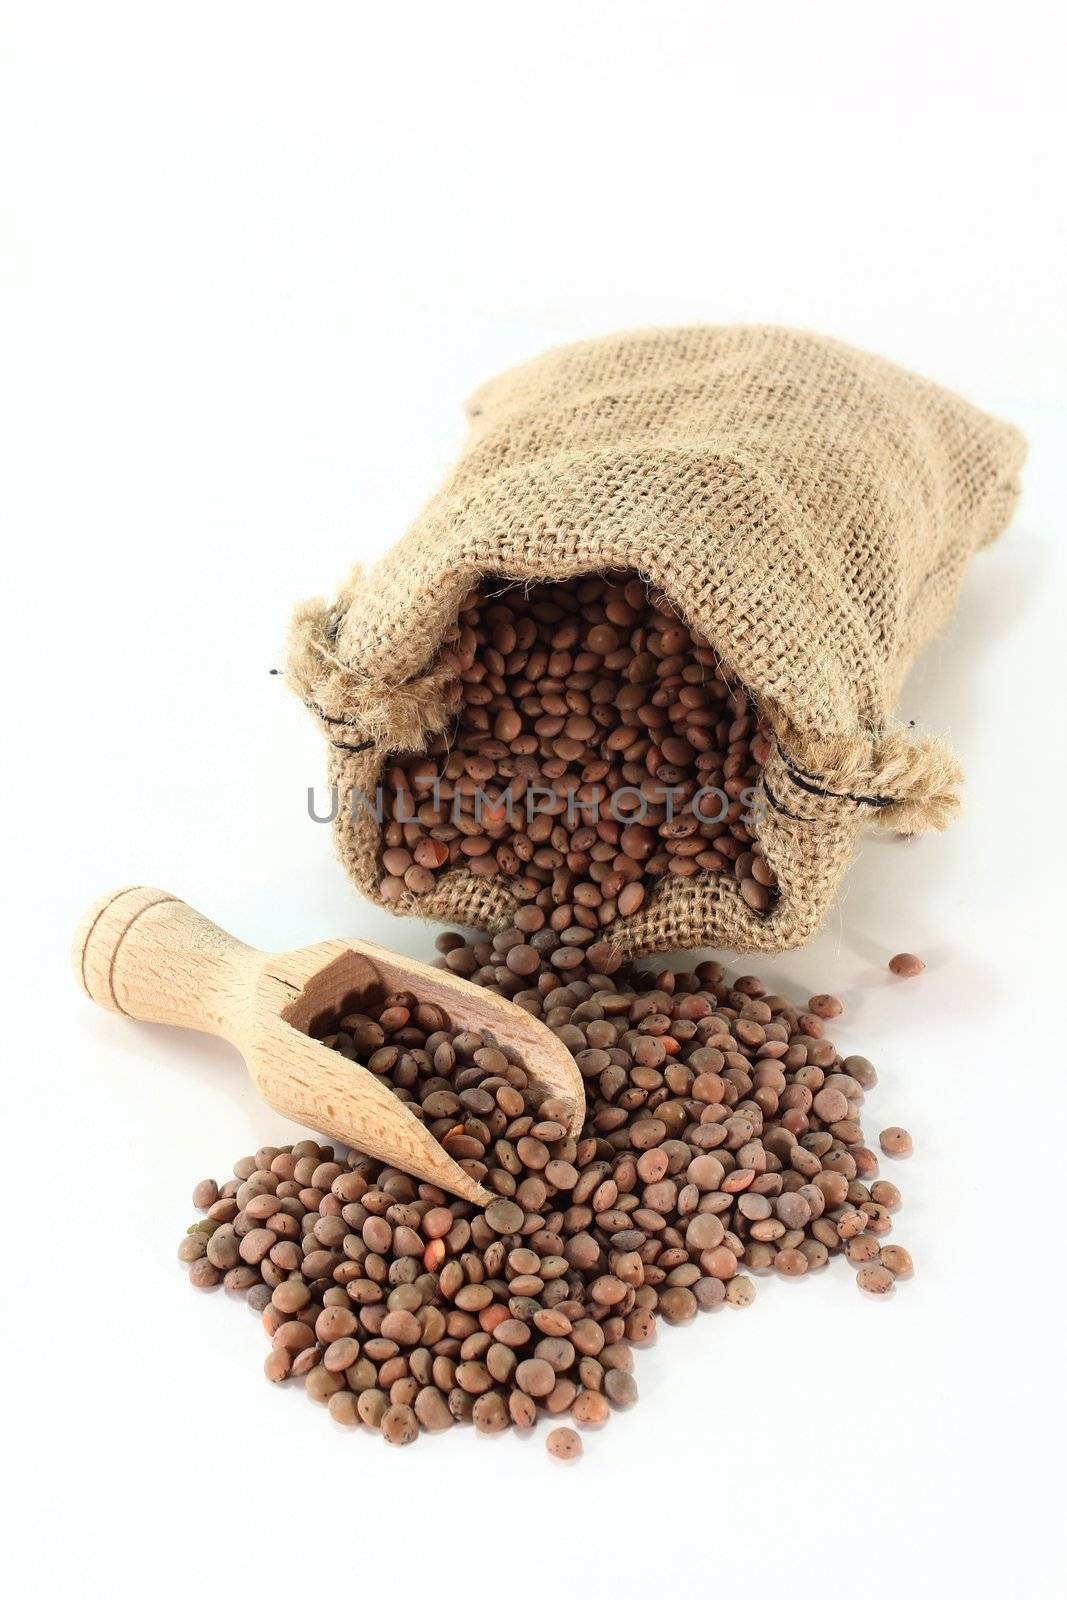 a sack of mountain lentils on a light background